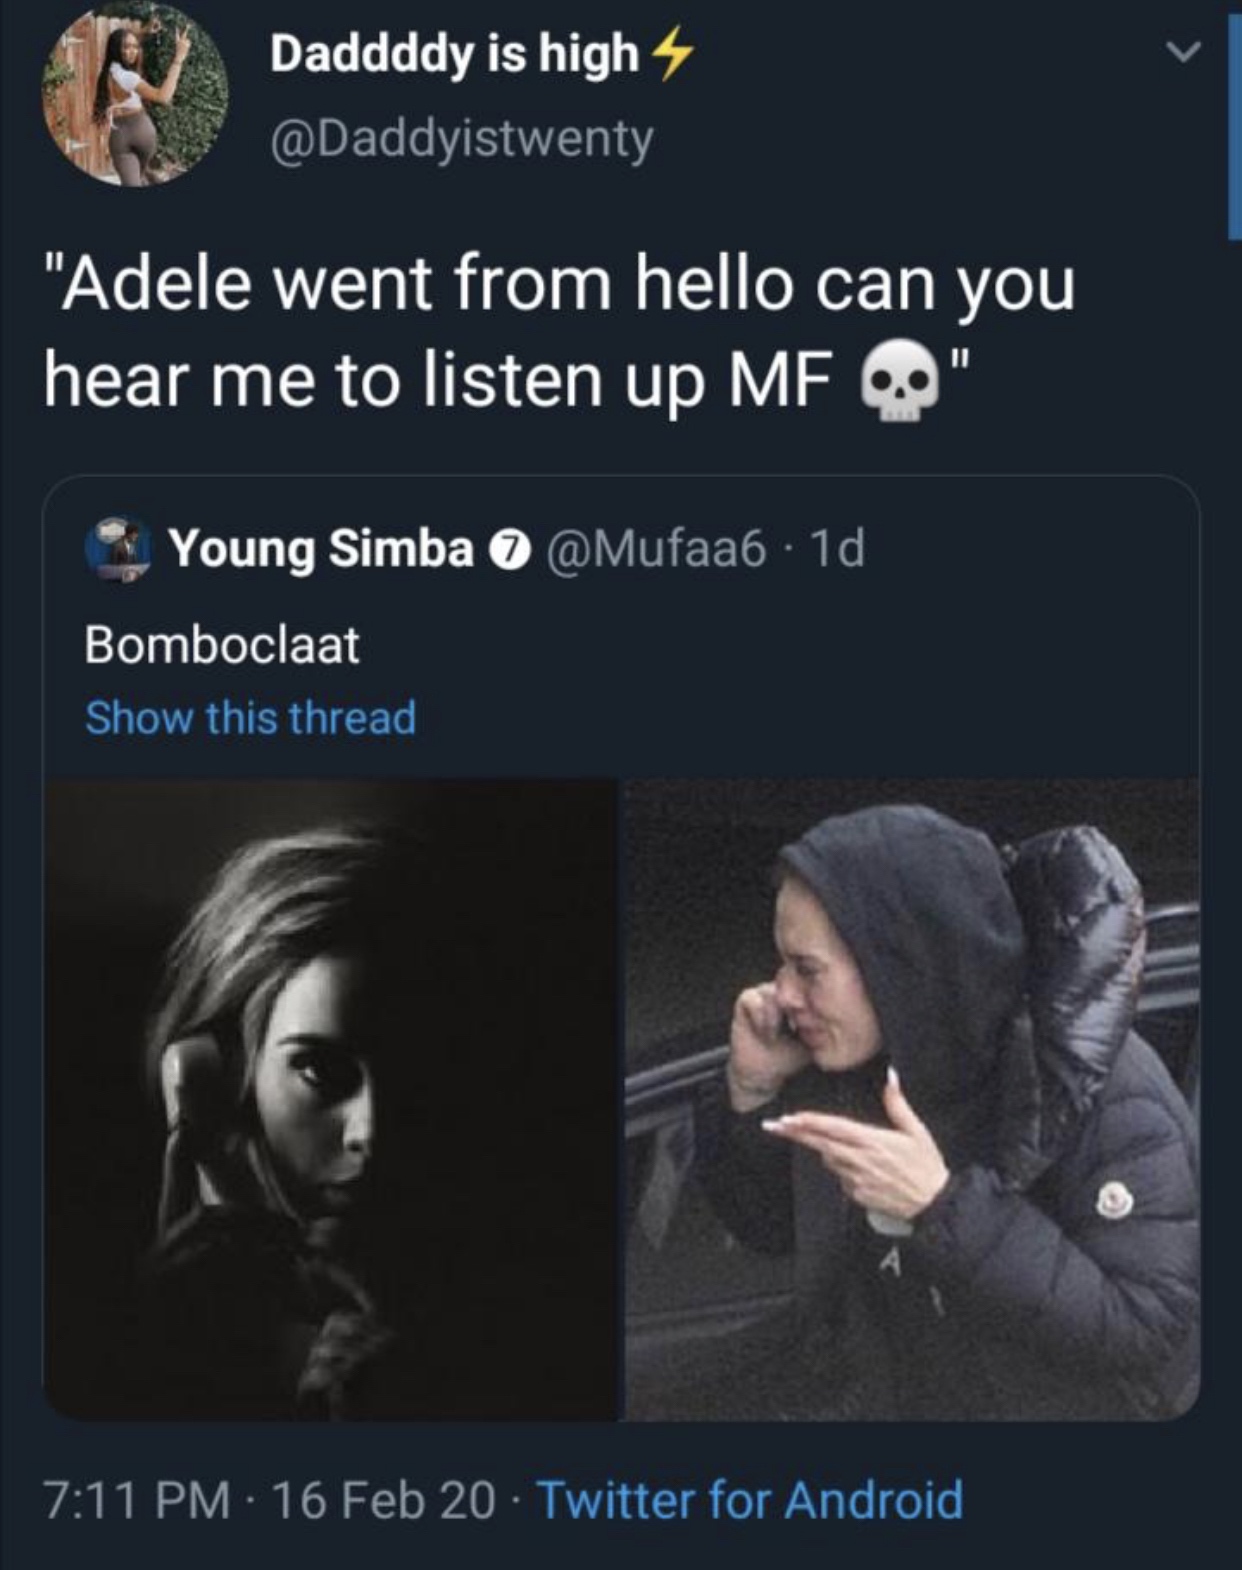 presentation - Daddddy is high "Adele went from hello can you hear me to listen up Mf 60" . 1d Young Simba Bomboclaat Show this thread 16 Feb 20 Twitter for Android